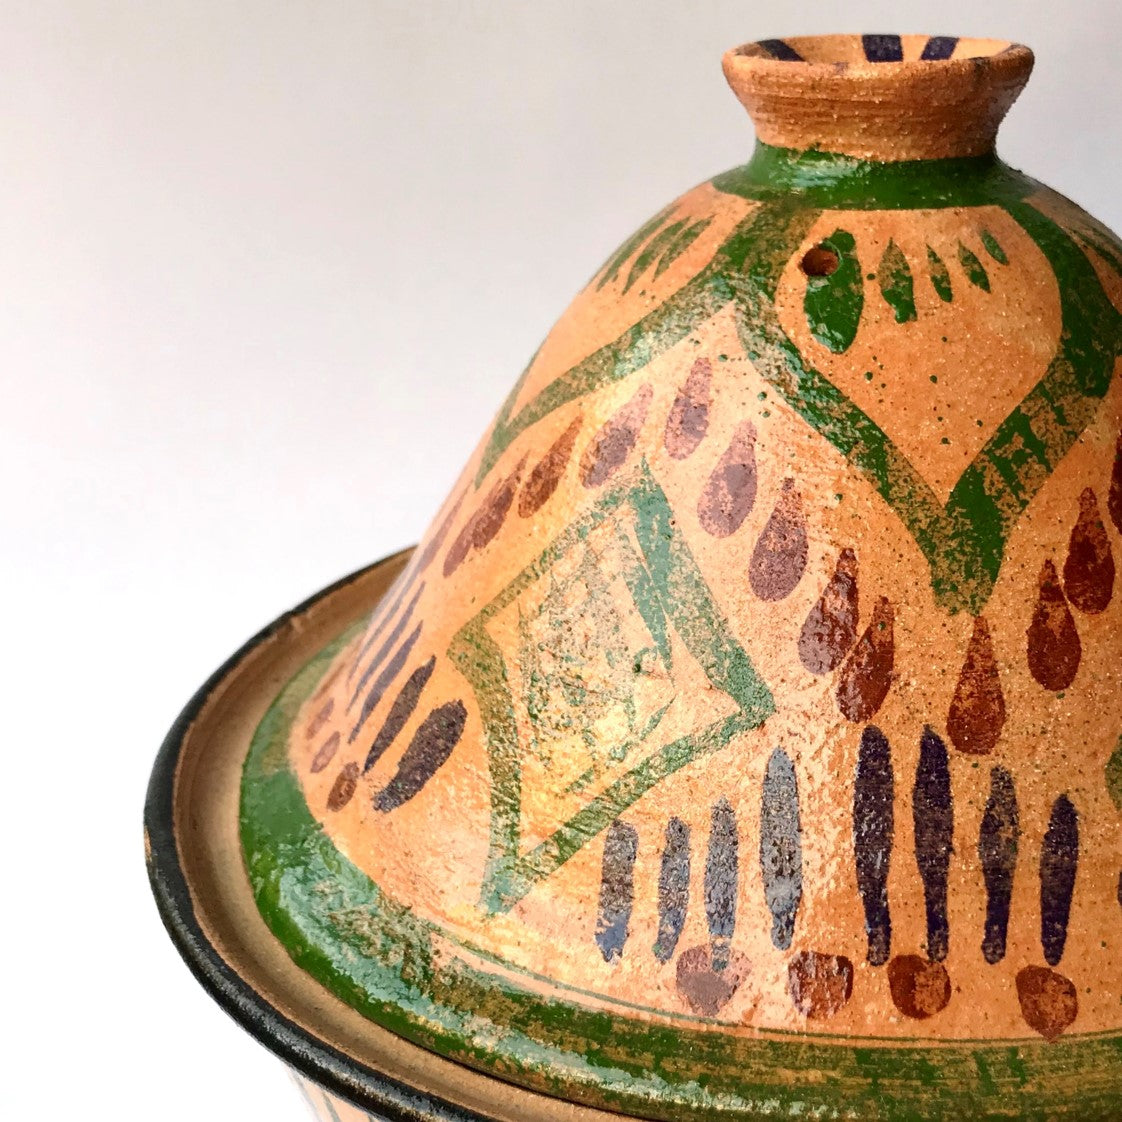 Rough clay pottery, tamed by hands, some color, and incredible amount of talent of the artisans from Oaxaca, Mexico.